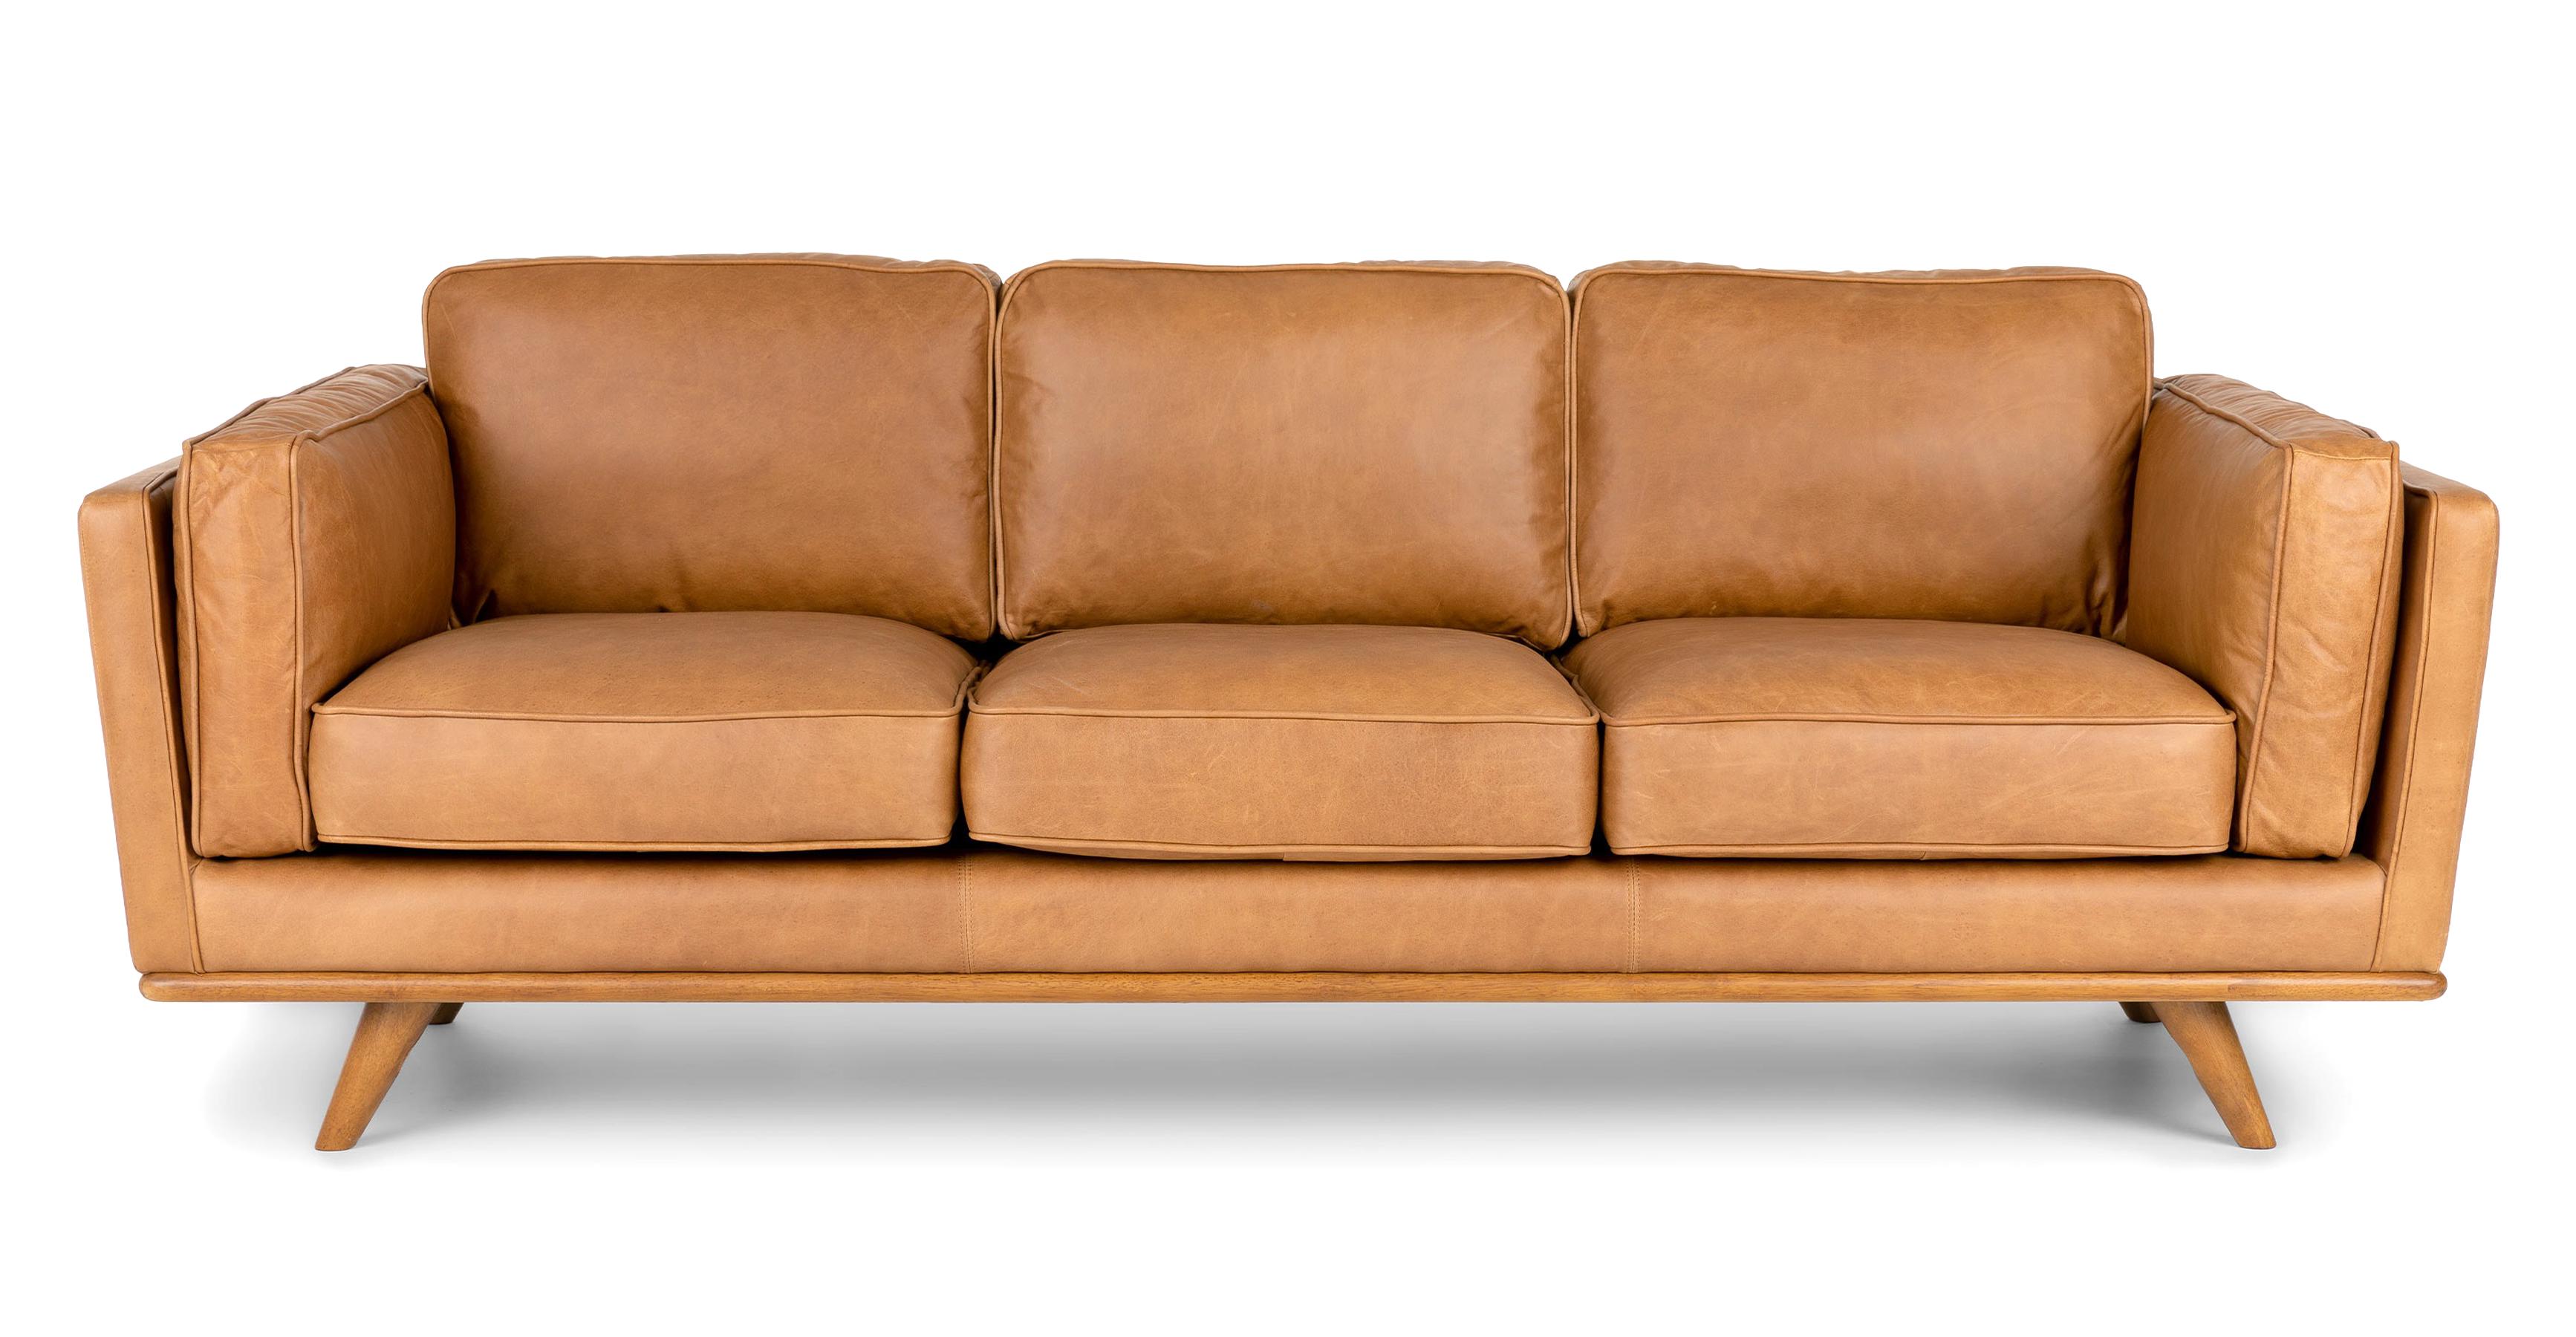 leather sofa for sale uk